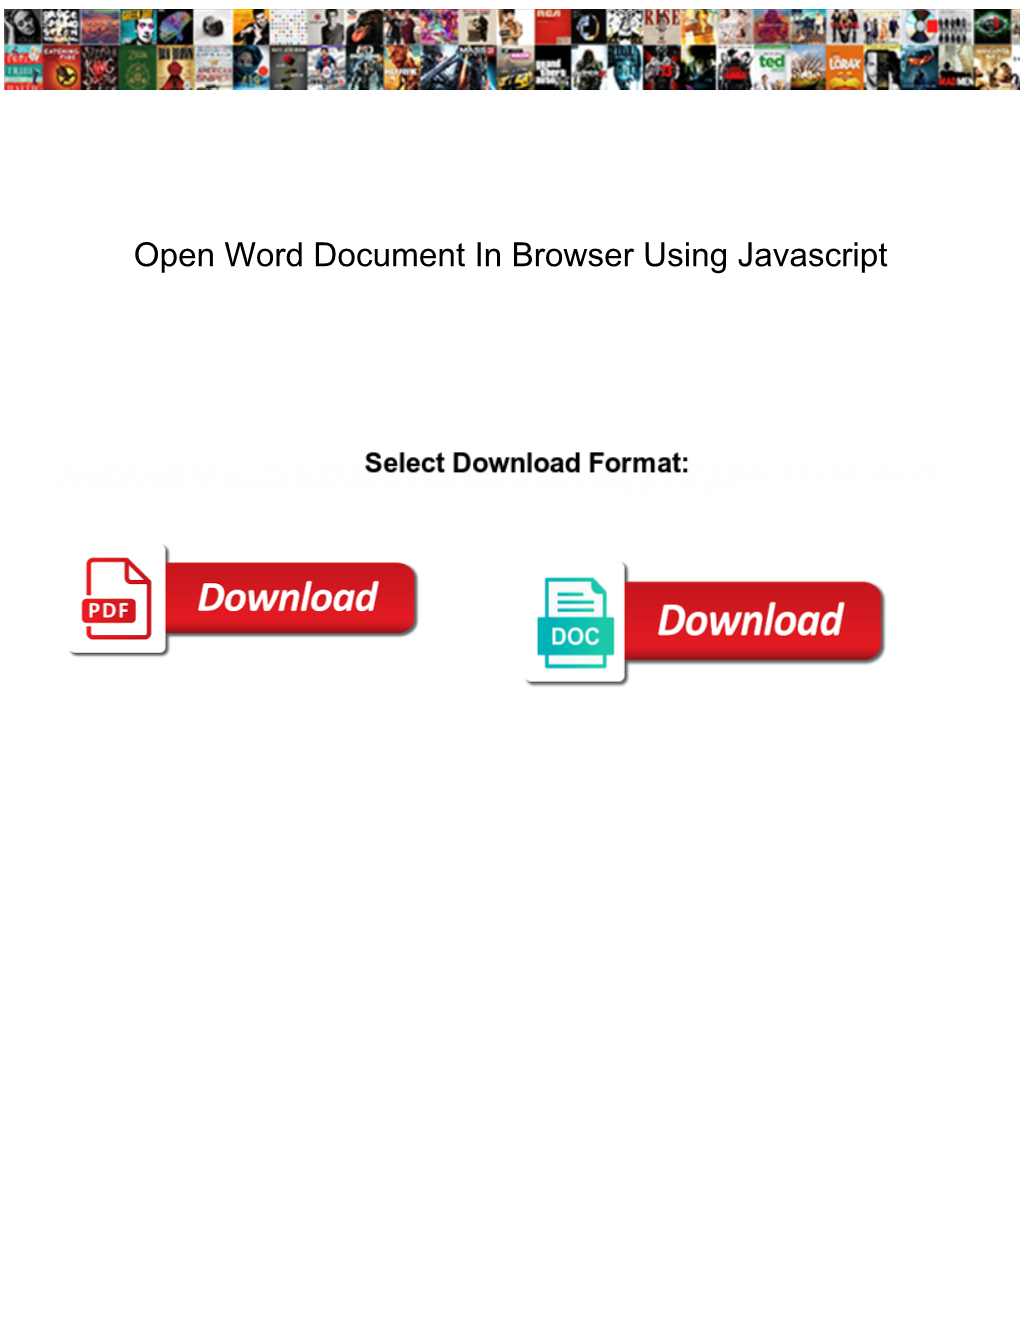 Open Word Document in Browser Using Javascript